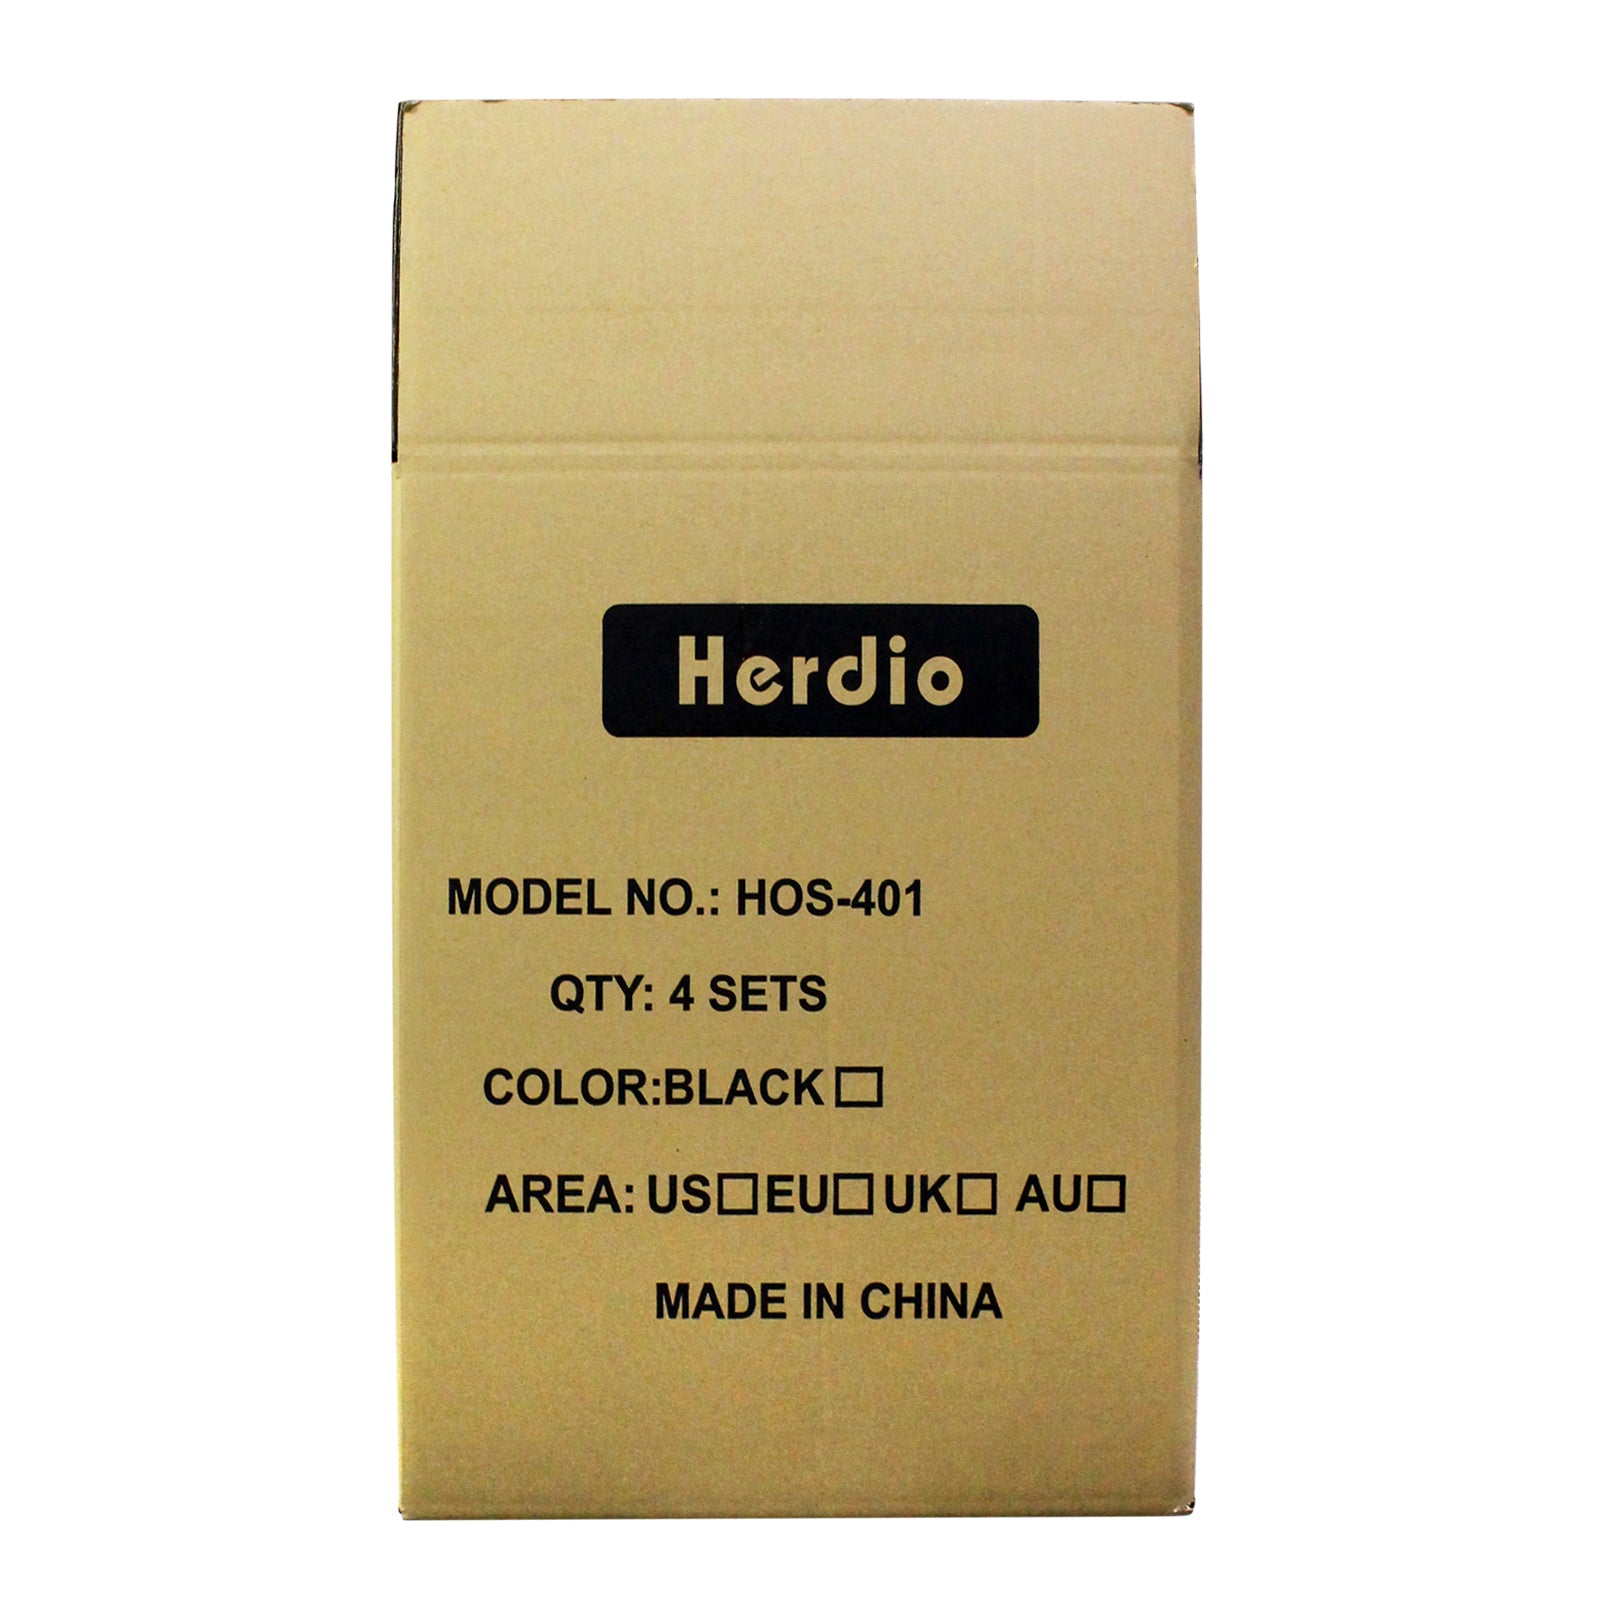 Herdio Shipping Boxes 44*37*54.5 CM Small Corrugated Cardboard Boxes,1 Pack - Herdio